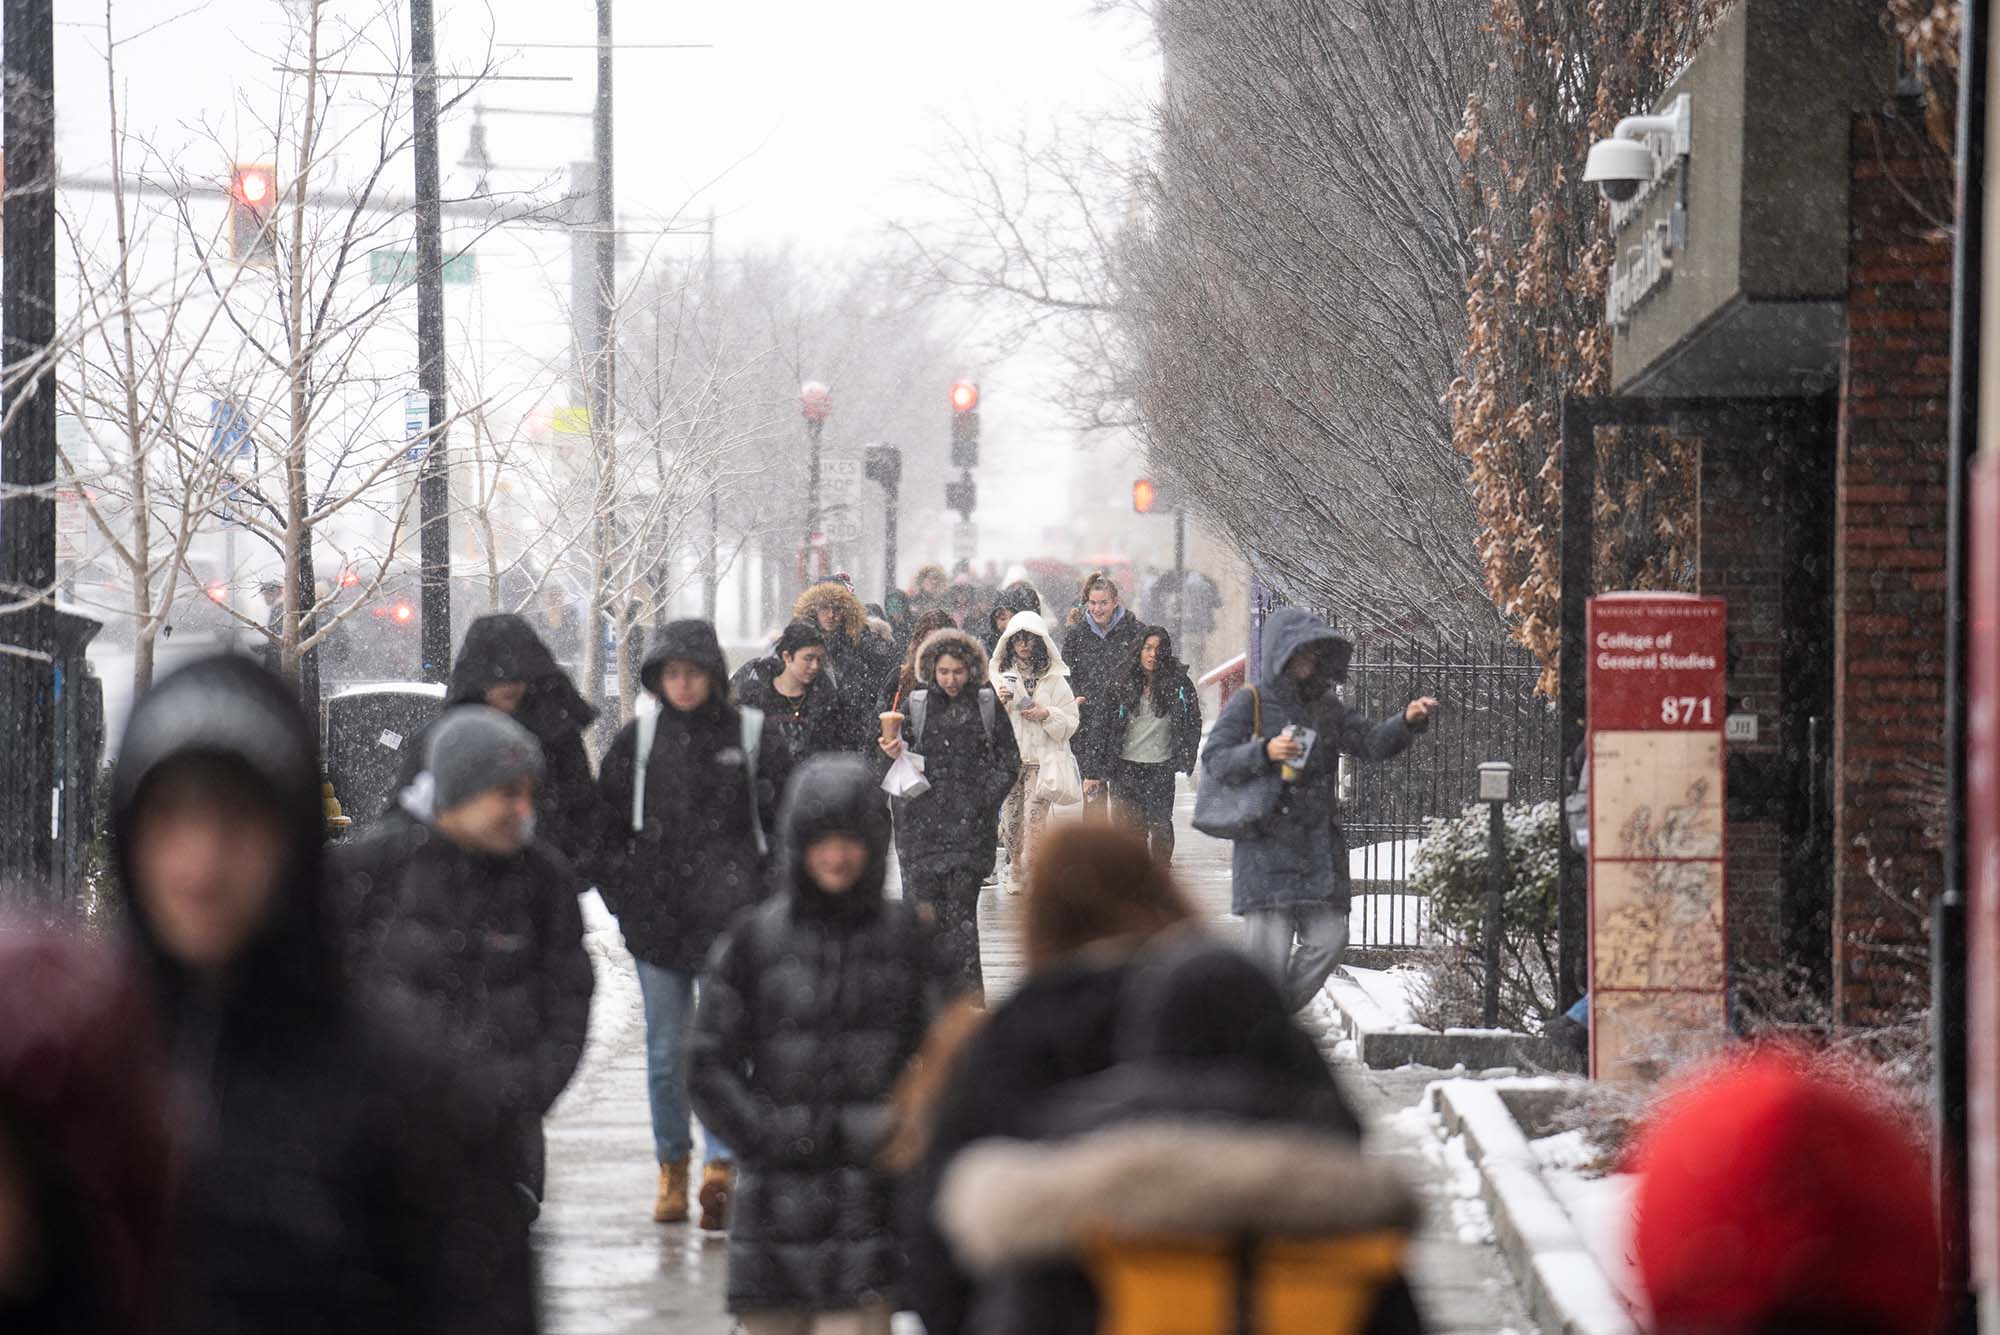 Photo: BU community members endure the elements while walking down the street next to the CGS building. Various people bundled up in winter gear are shown walking down the sidewalk on a snowy day.